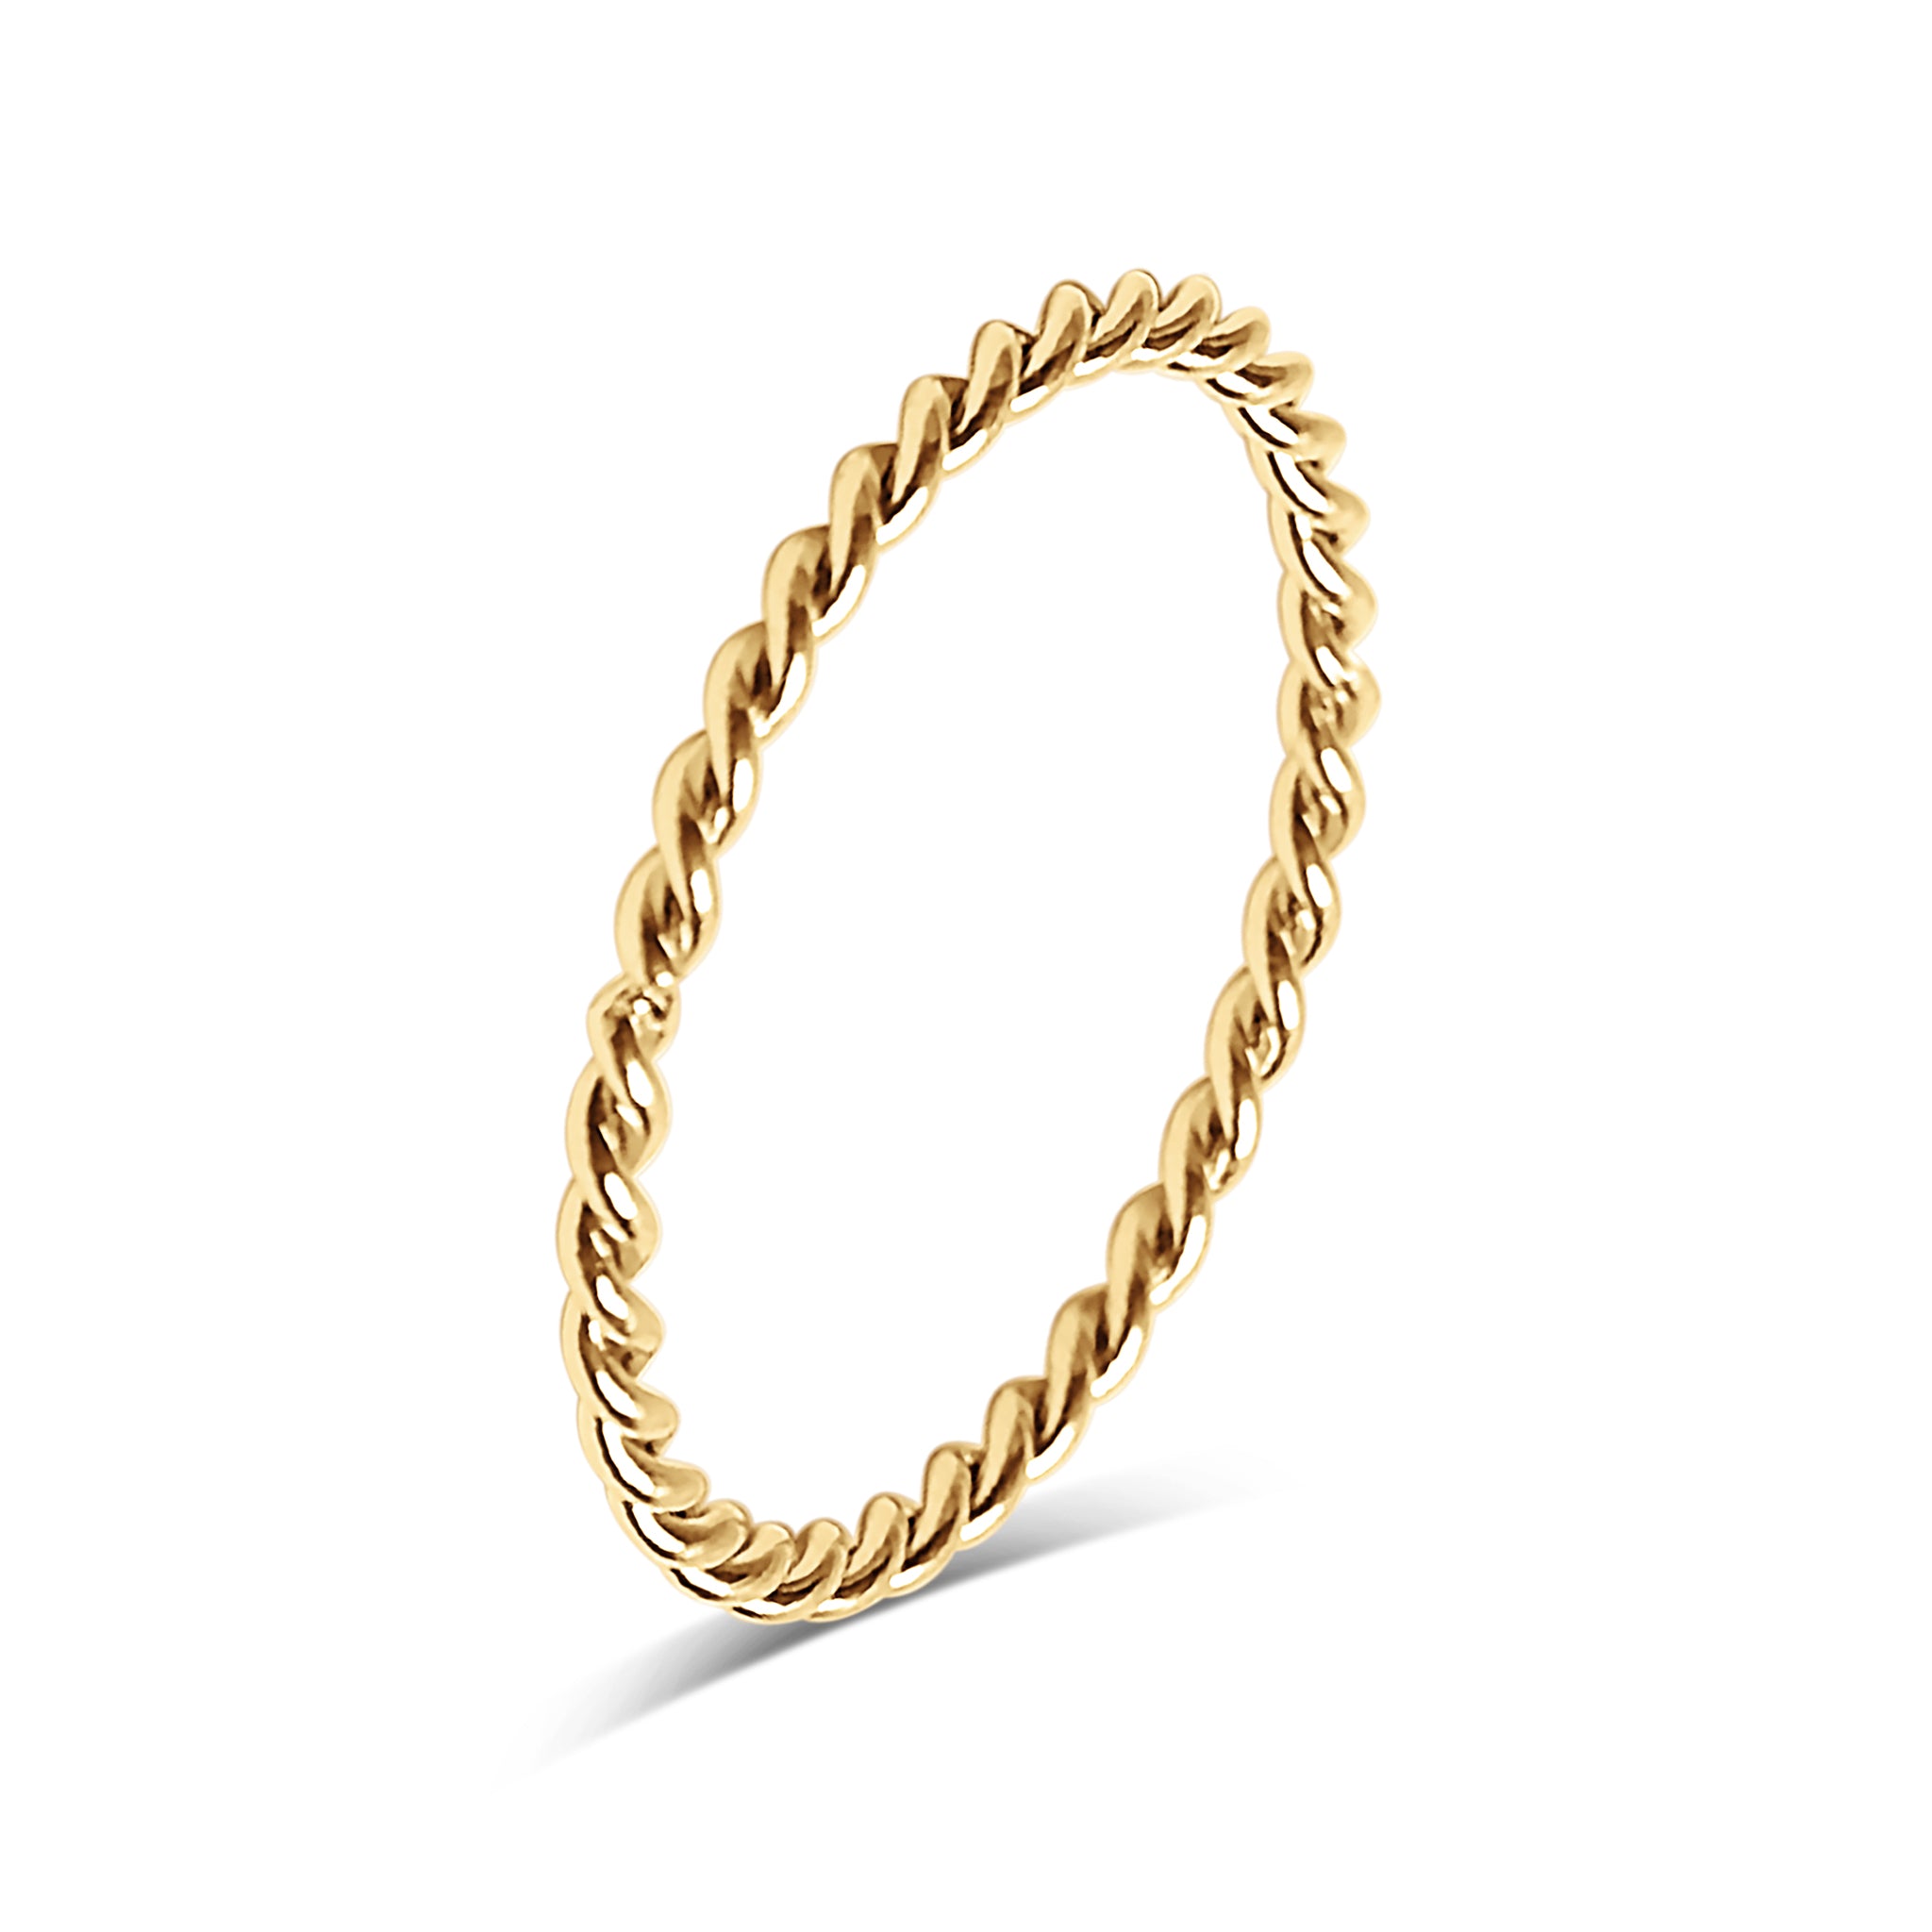 Rings Braided Stainless Steel Spacer Ring Gold / 9 Wholesale Jewelry Website 9 Gold Unisex